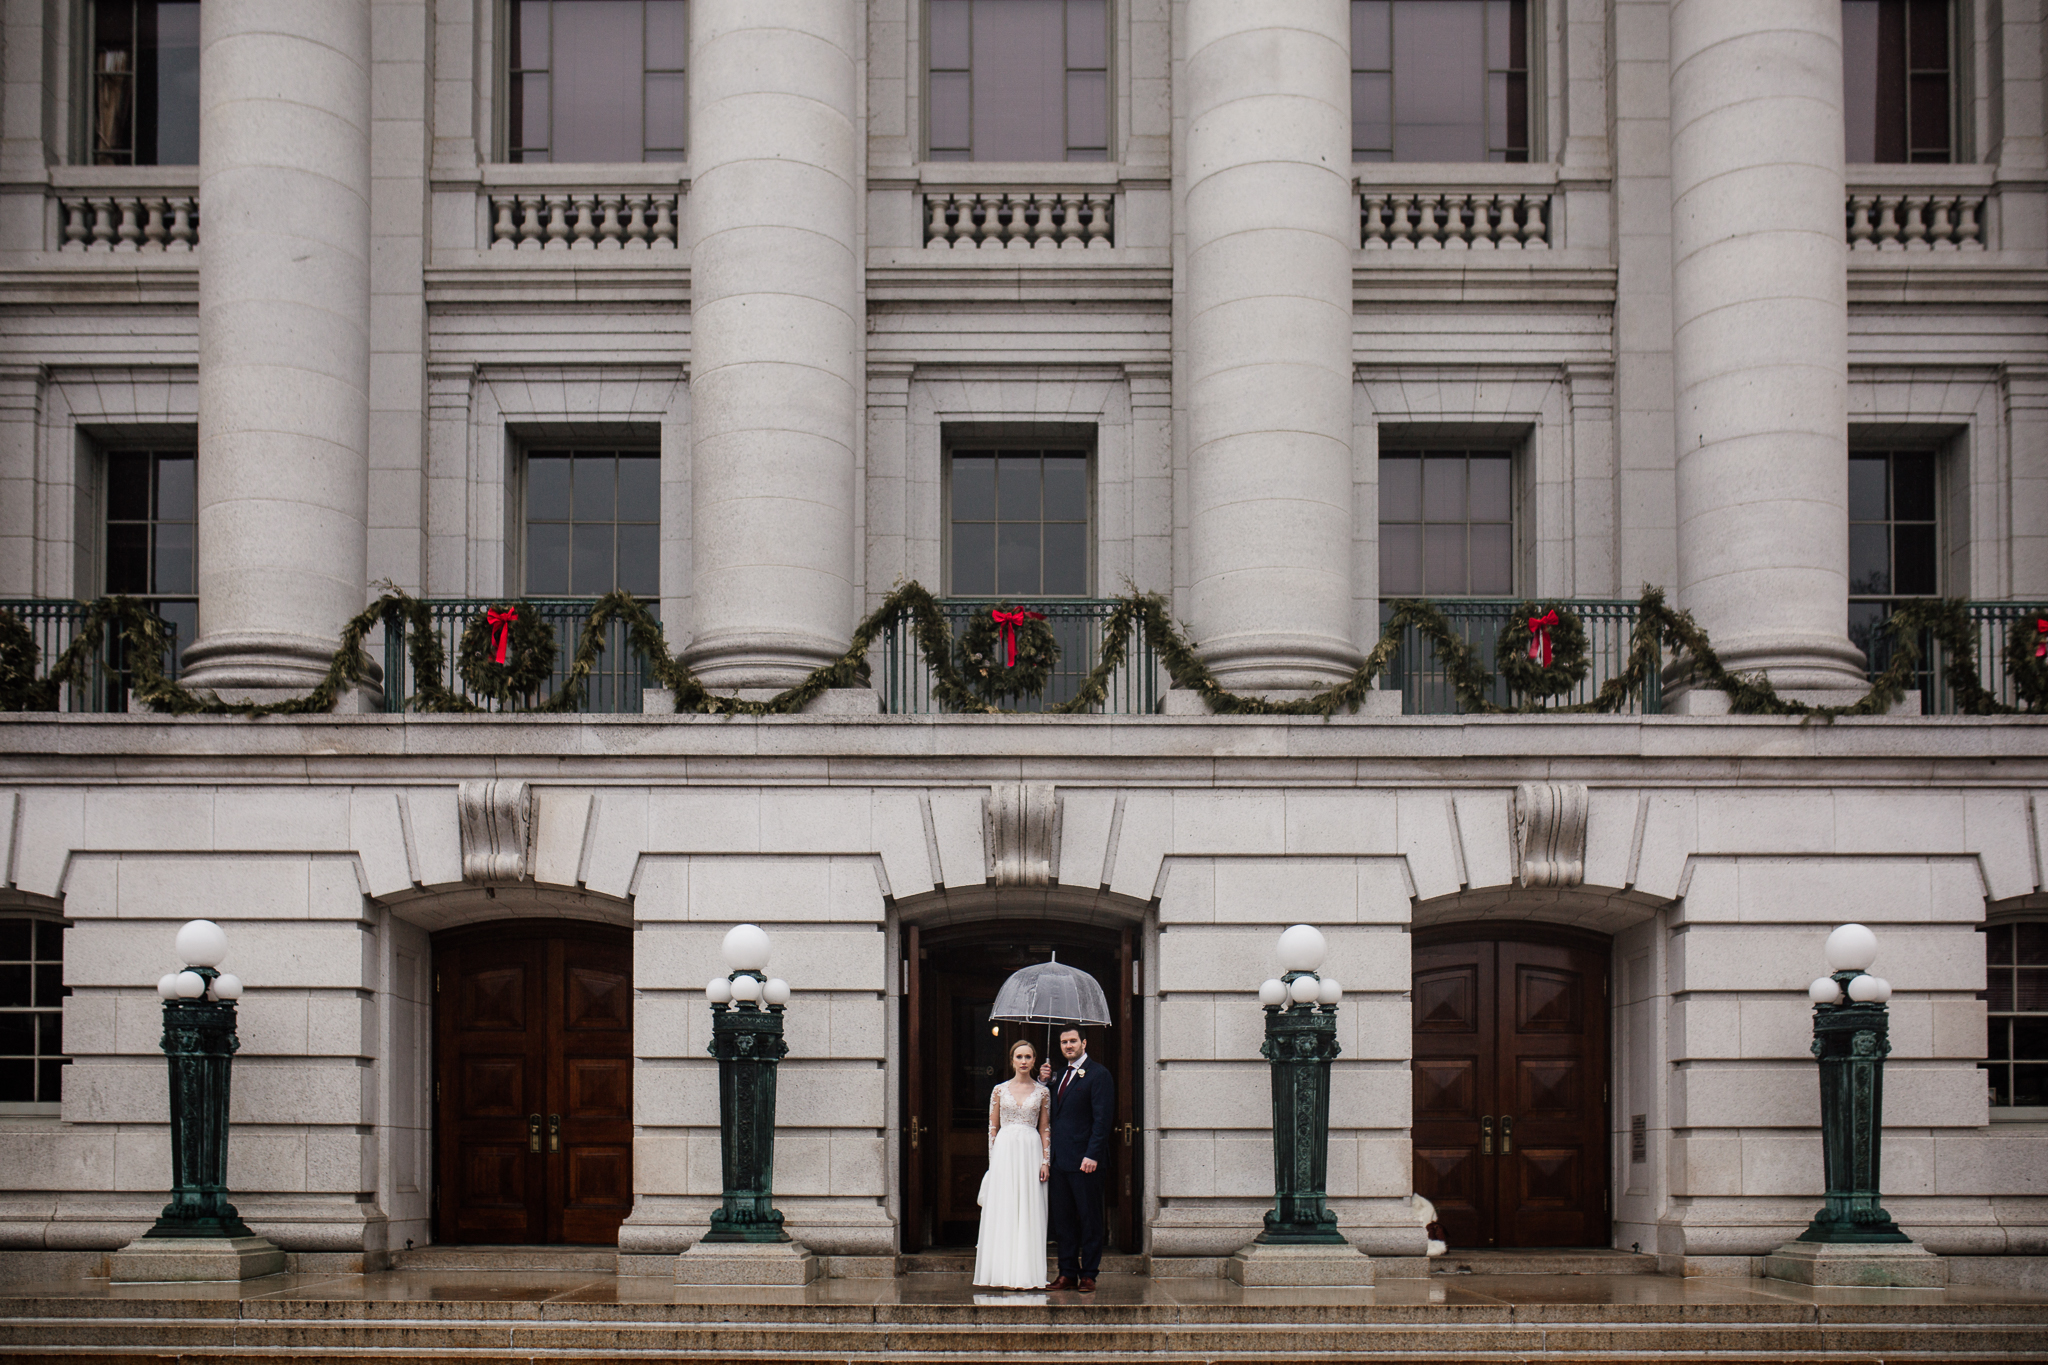 Bride and groom standing with an umbrella in the doorway of the Madison State Capitol.